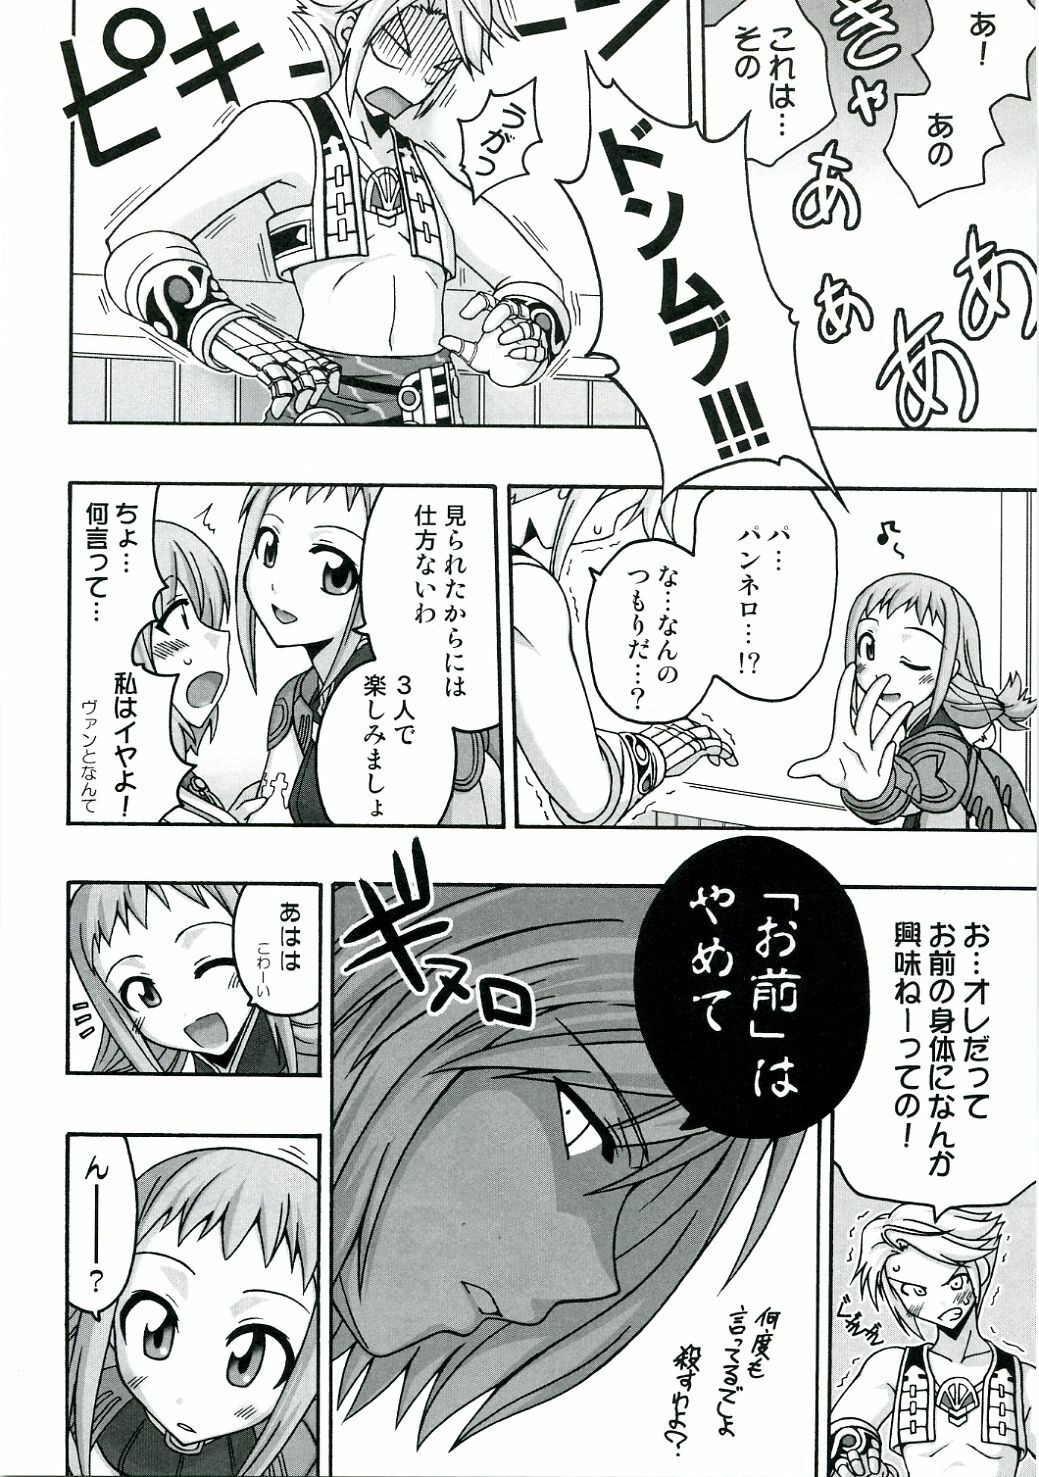 (C70) [FruitsJam (Mikagami Sou)] In The Room (Final Fantasy XII) page 7 full